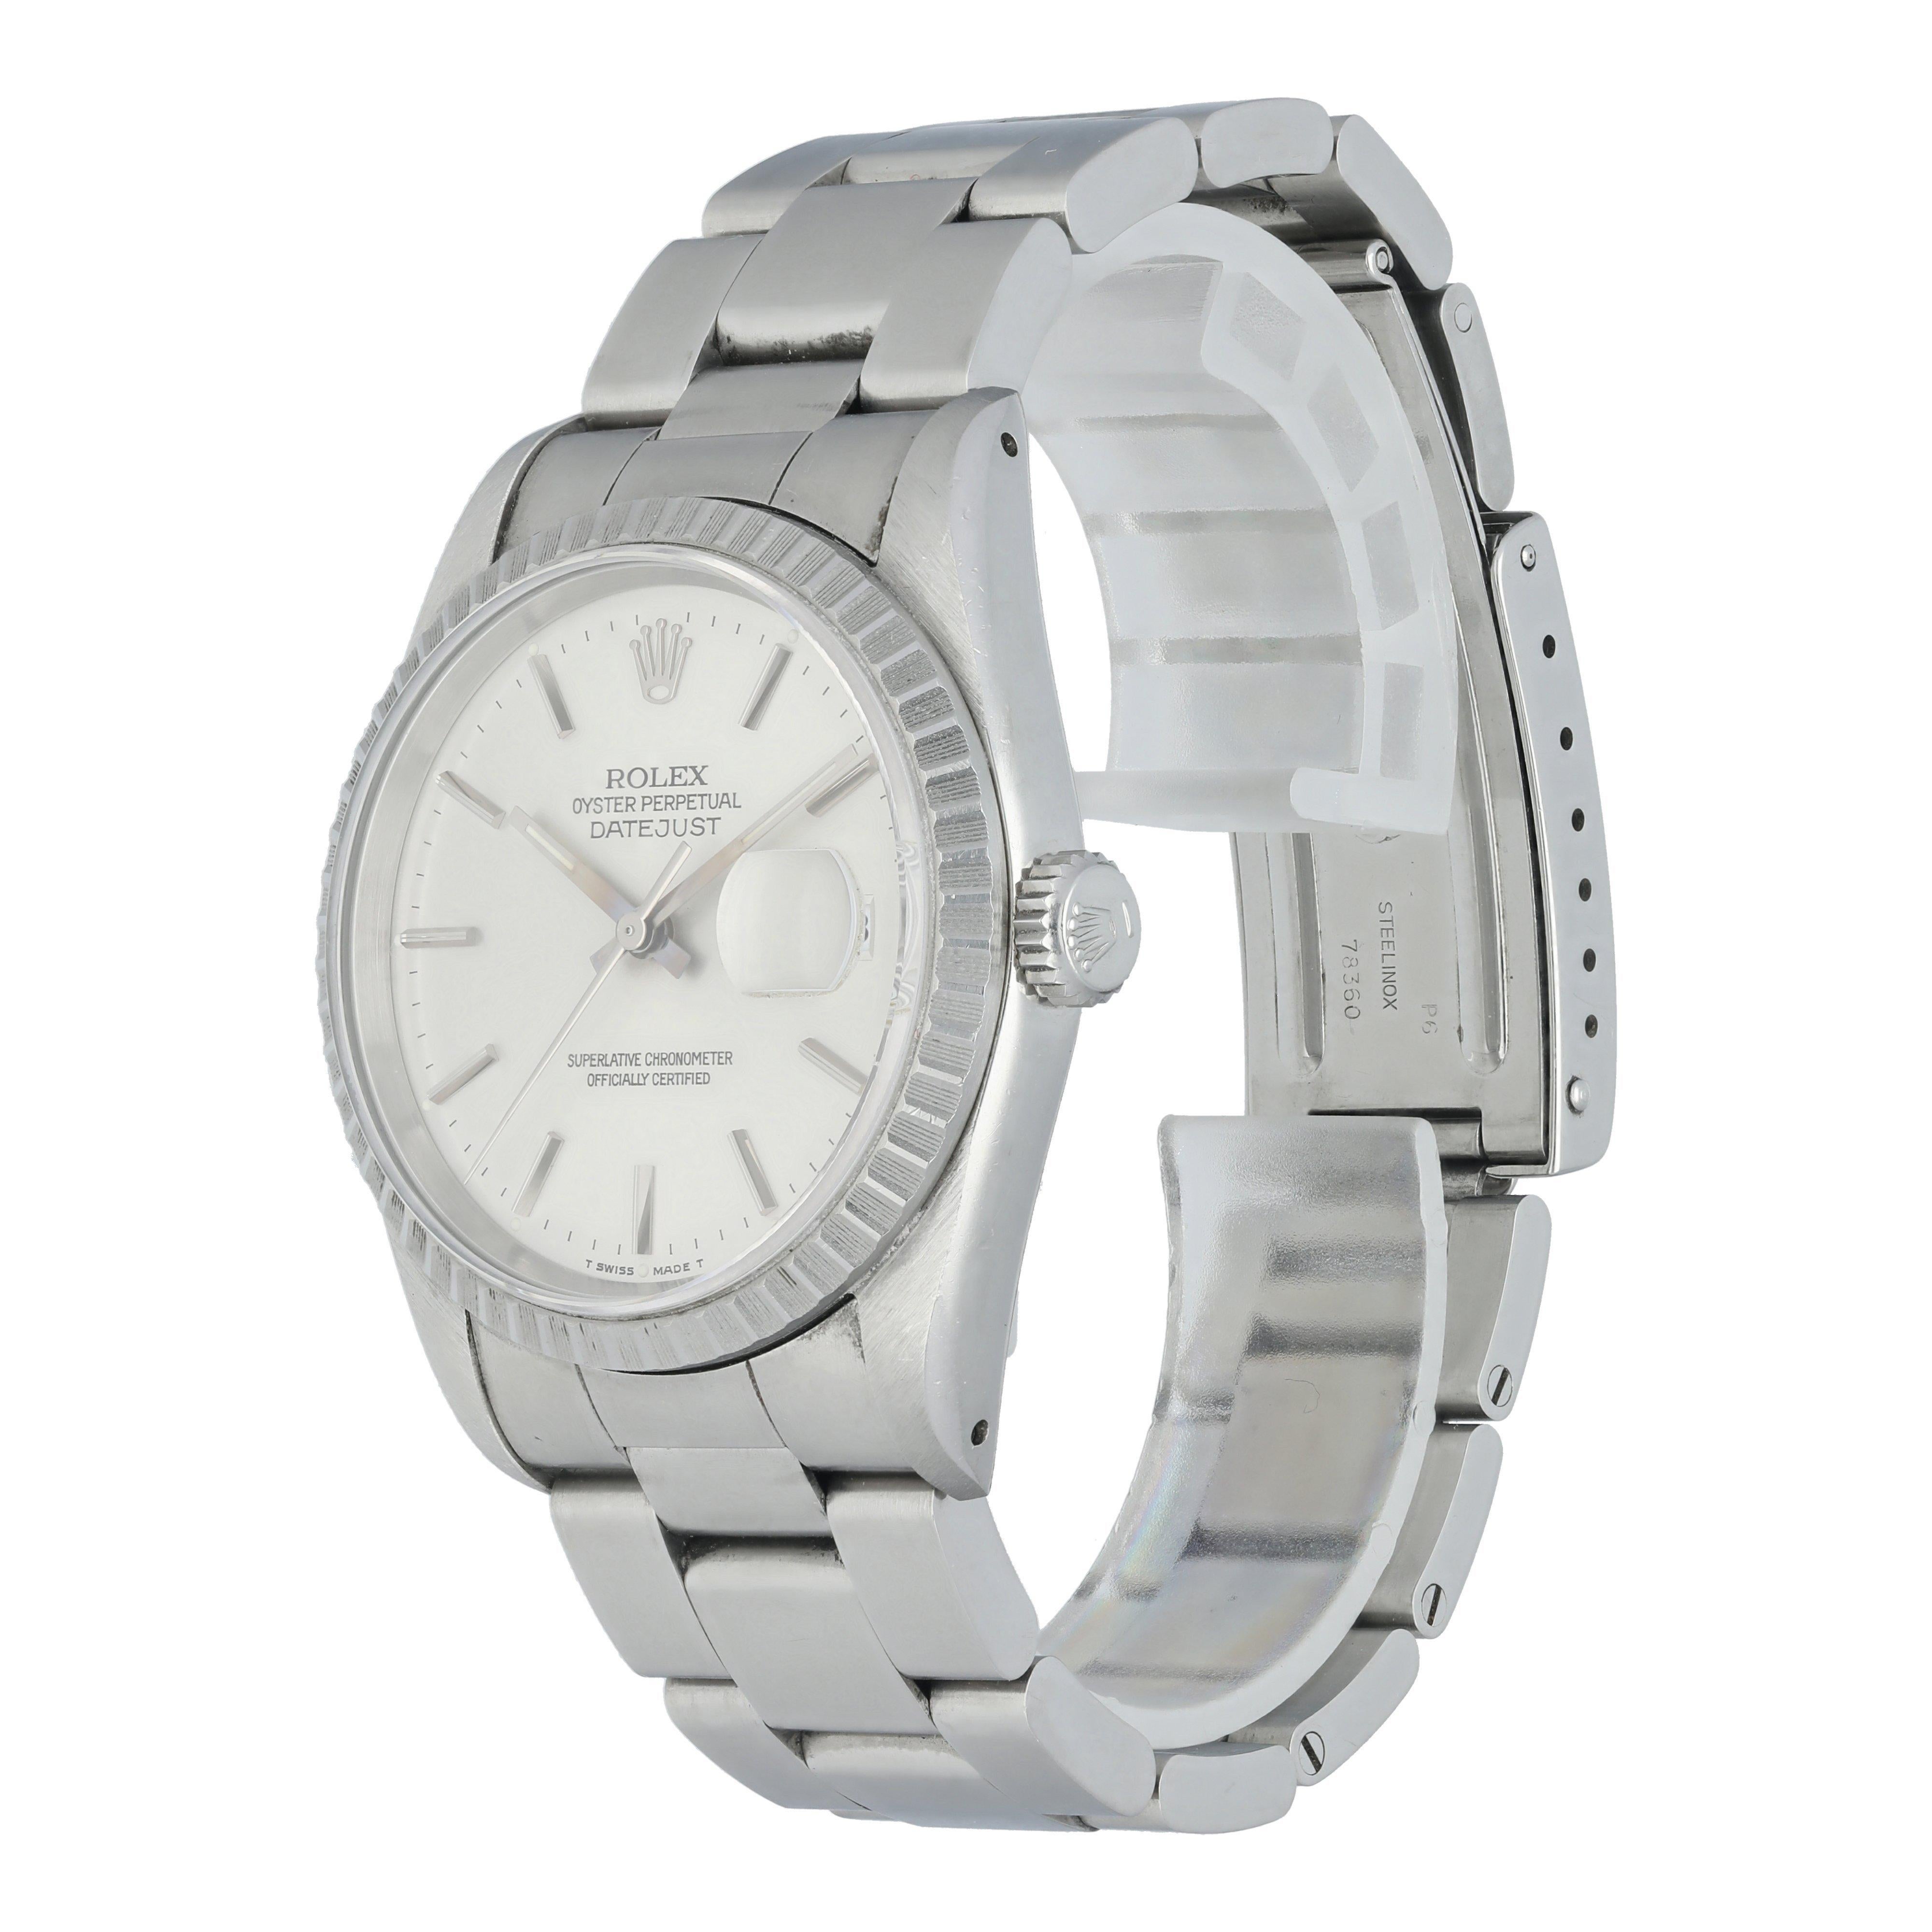 Rolex Datejust 16220 Mens Watch.
36mm stainless steel case with stainless steel engine turn bezel.
grey dial with steel hands and index hour markers.
Date display at 3 o'clock position.
Minute markers around the outer dial.
Stainless steel jubilee